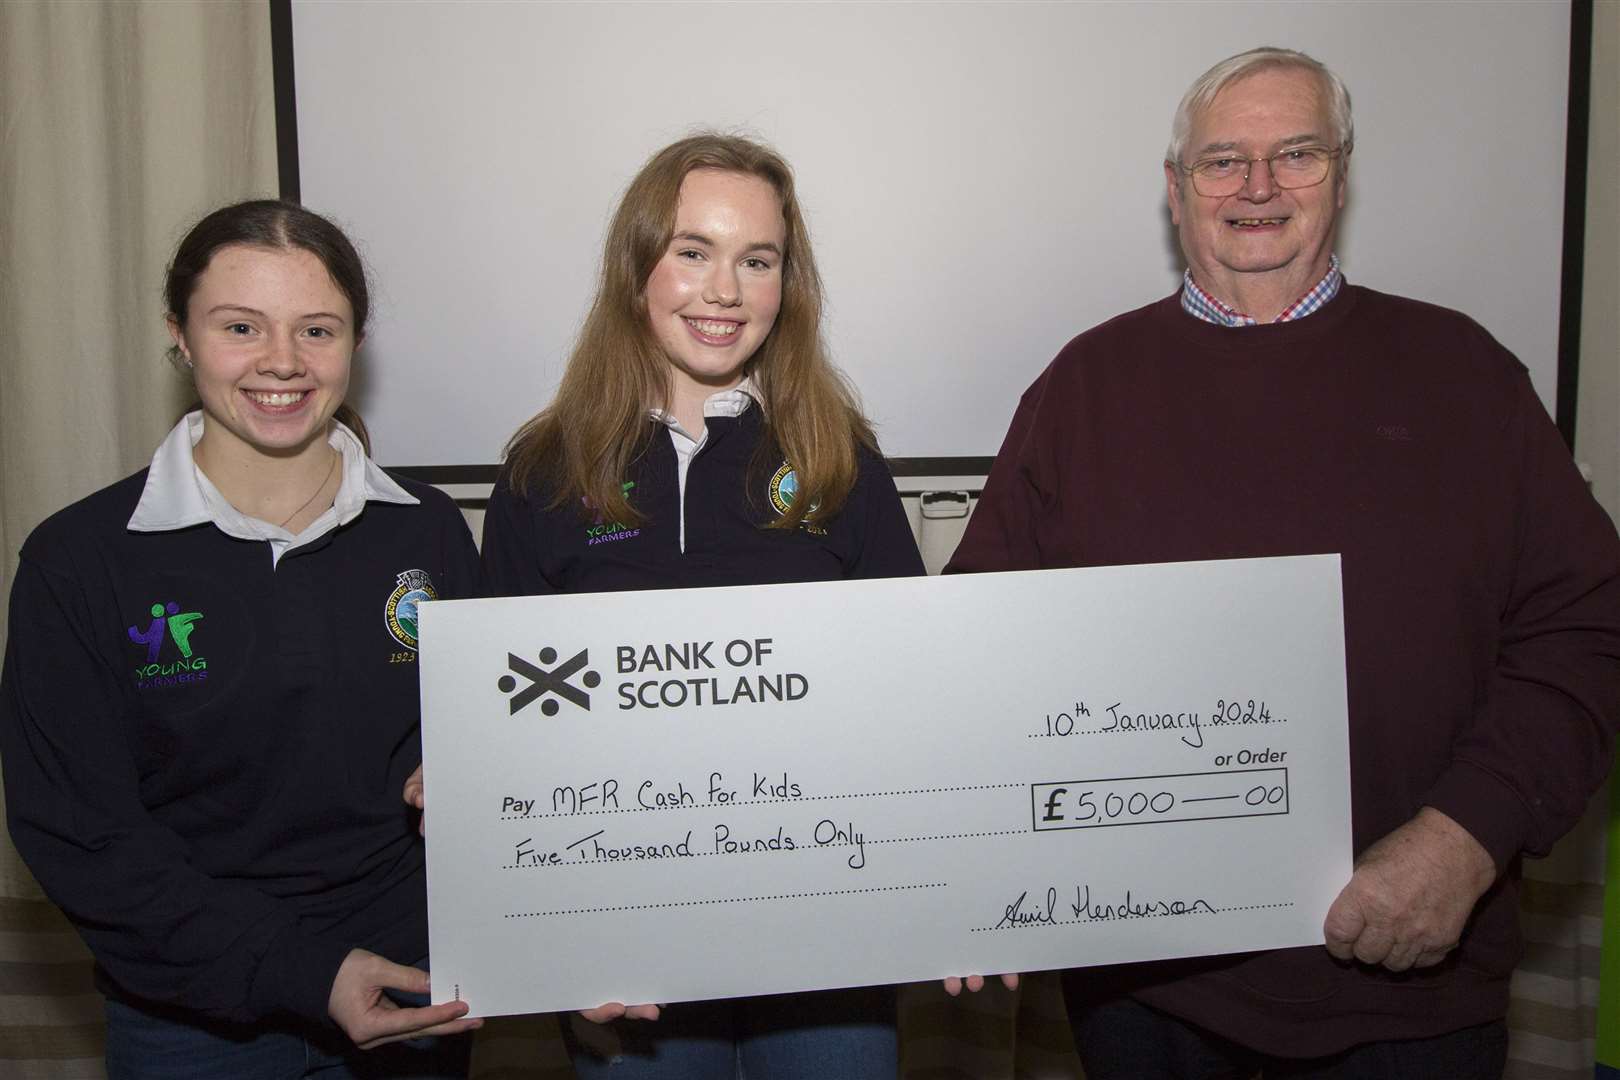 Chloe Begg (left), of Halkirk Young Farmers, and Isla Mackay, Bower, present the MFR Cash For Kids cheque to Will Gunn, who accepted it on behalf of the charity. Picture: Robert MacDonald / Northern Studios